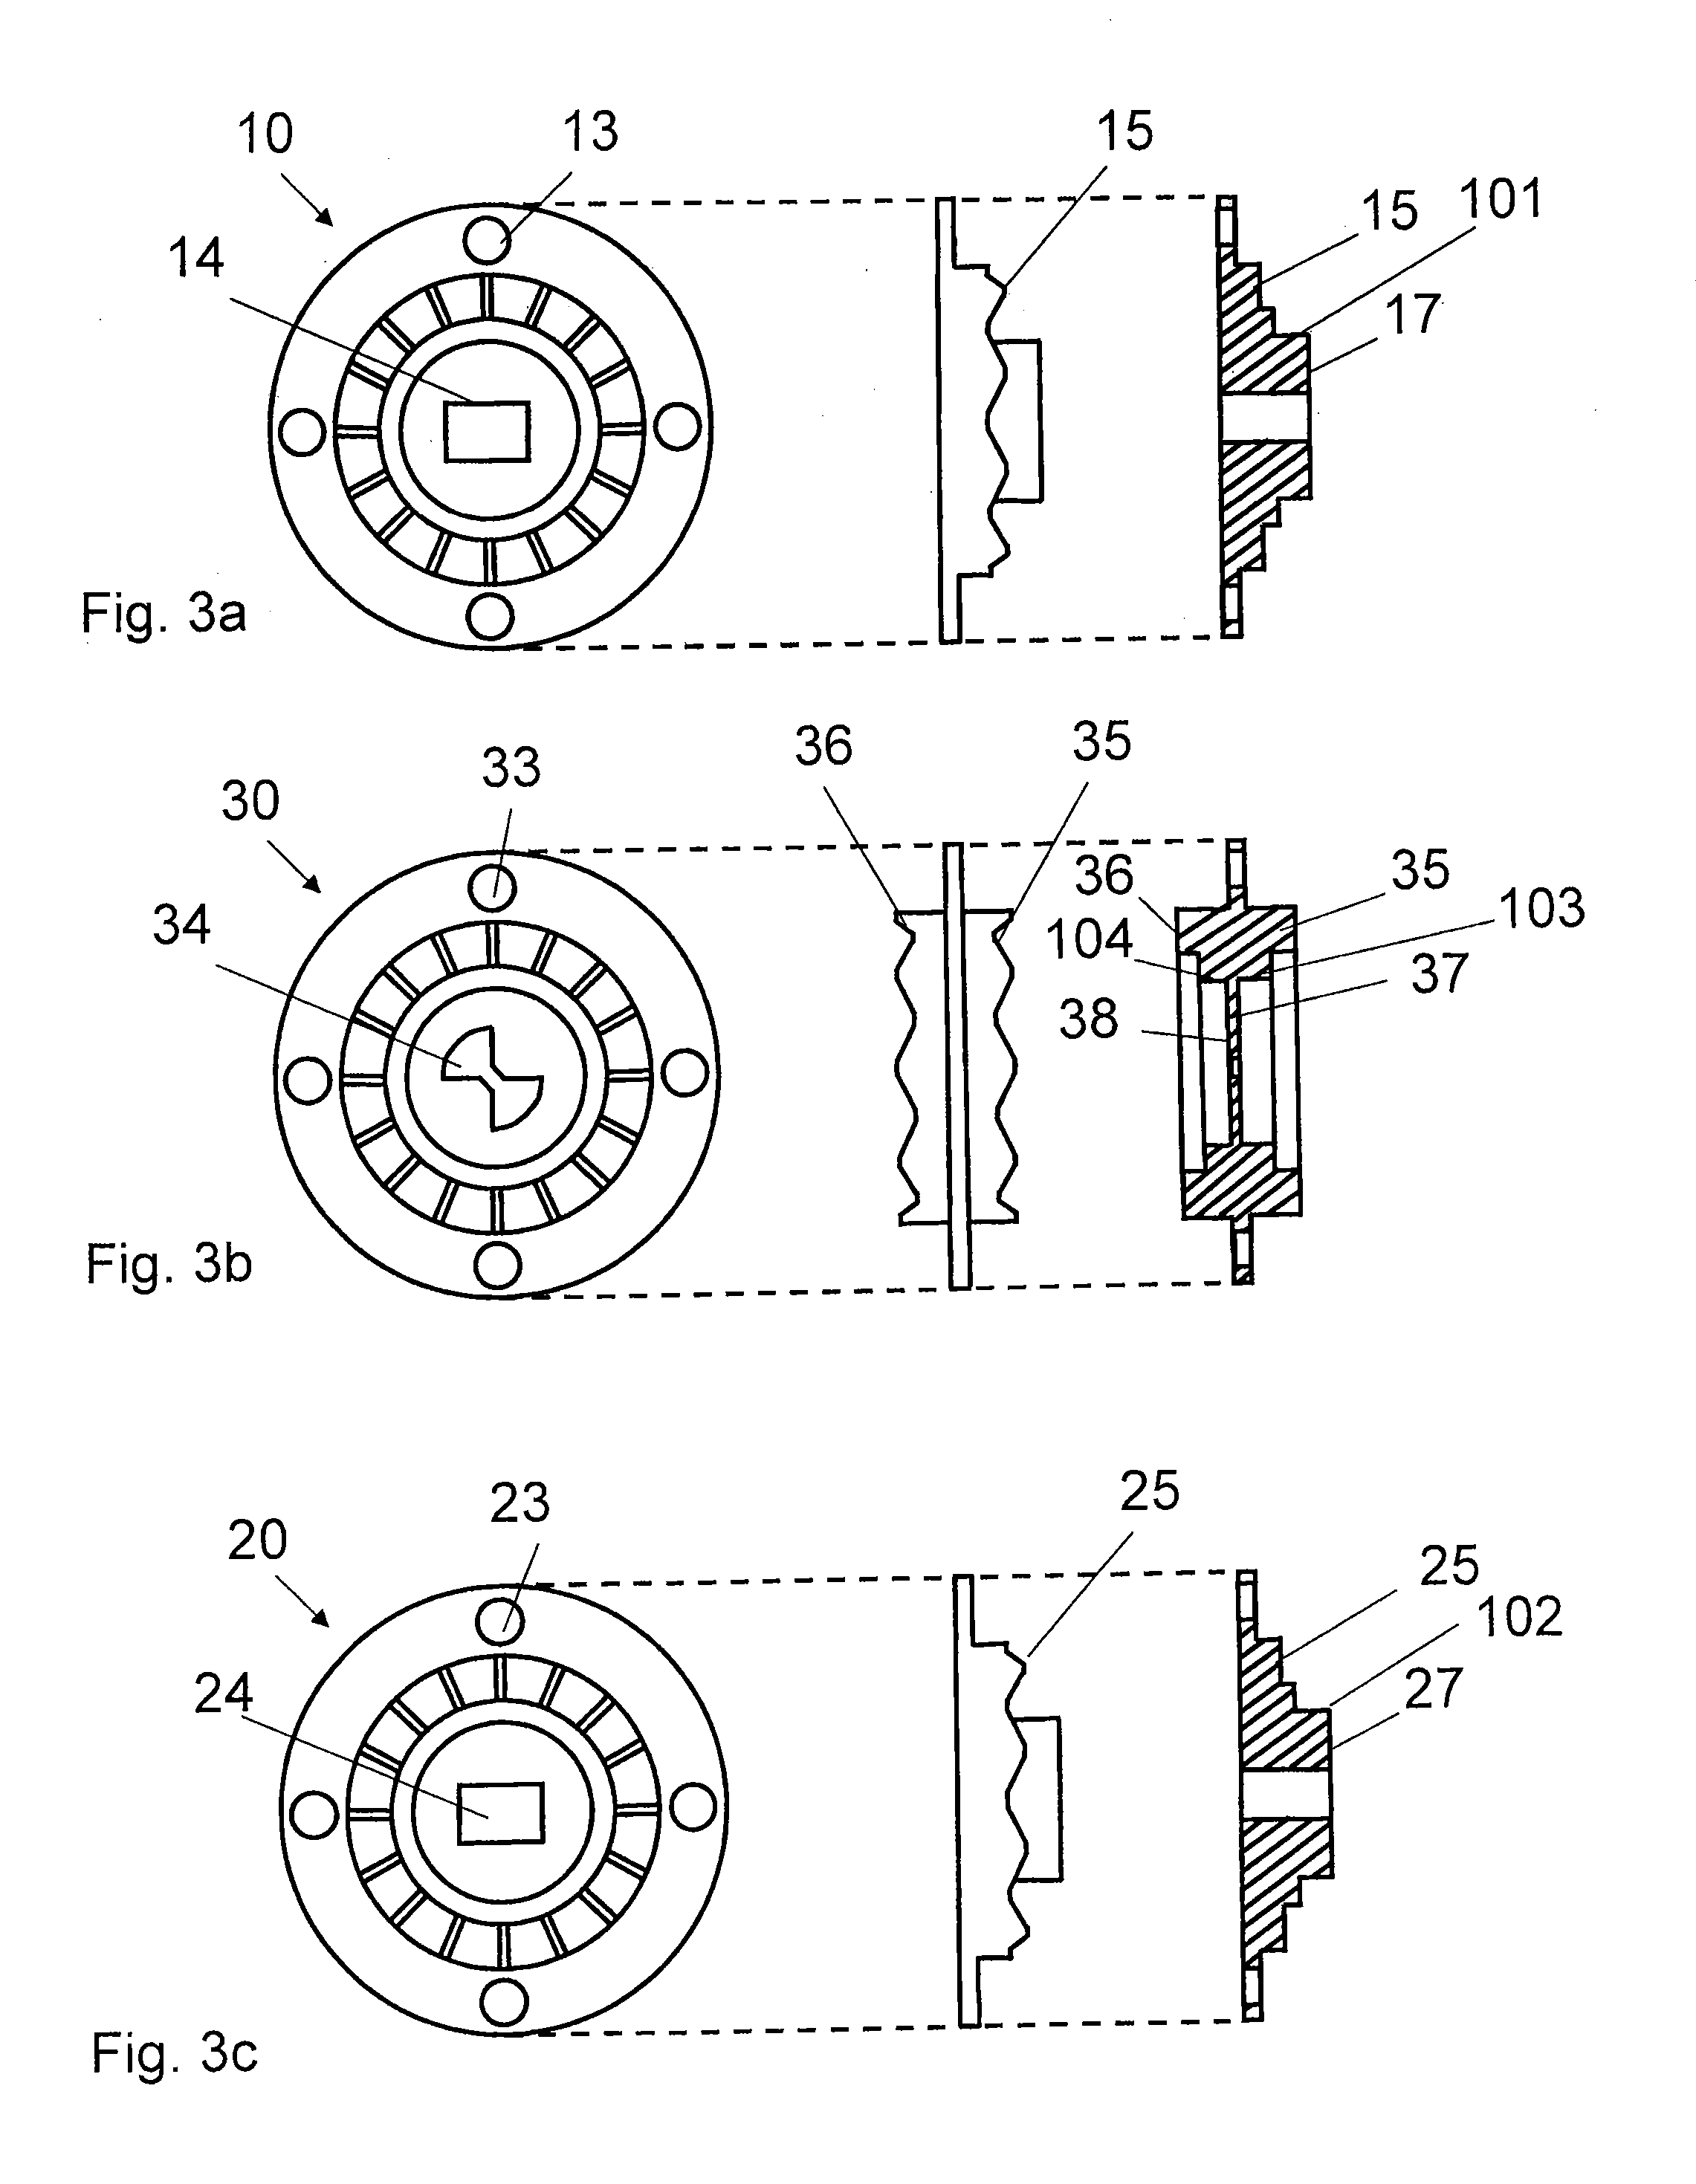 Rotary joint for joining two waveguides